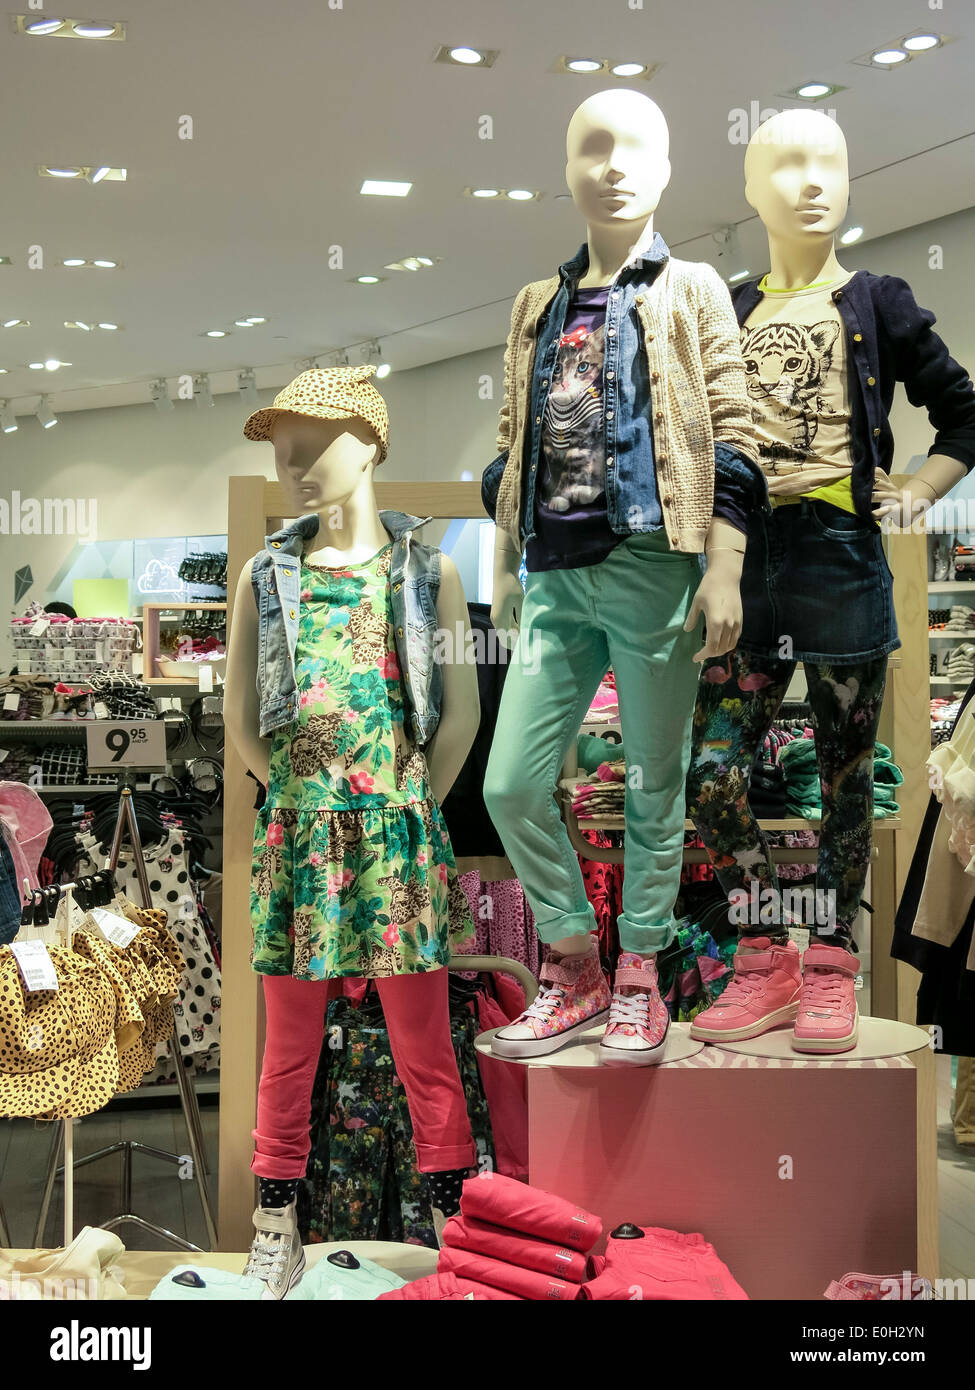 Woman's Department, Mannequins, H&M Clothing Store Interior in Times  Square, NYC, USA Stock Photo - Alamy